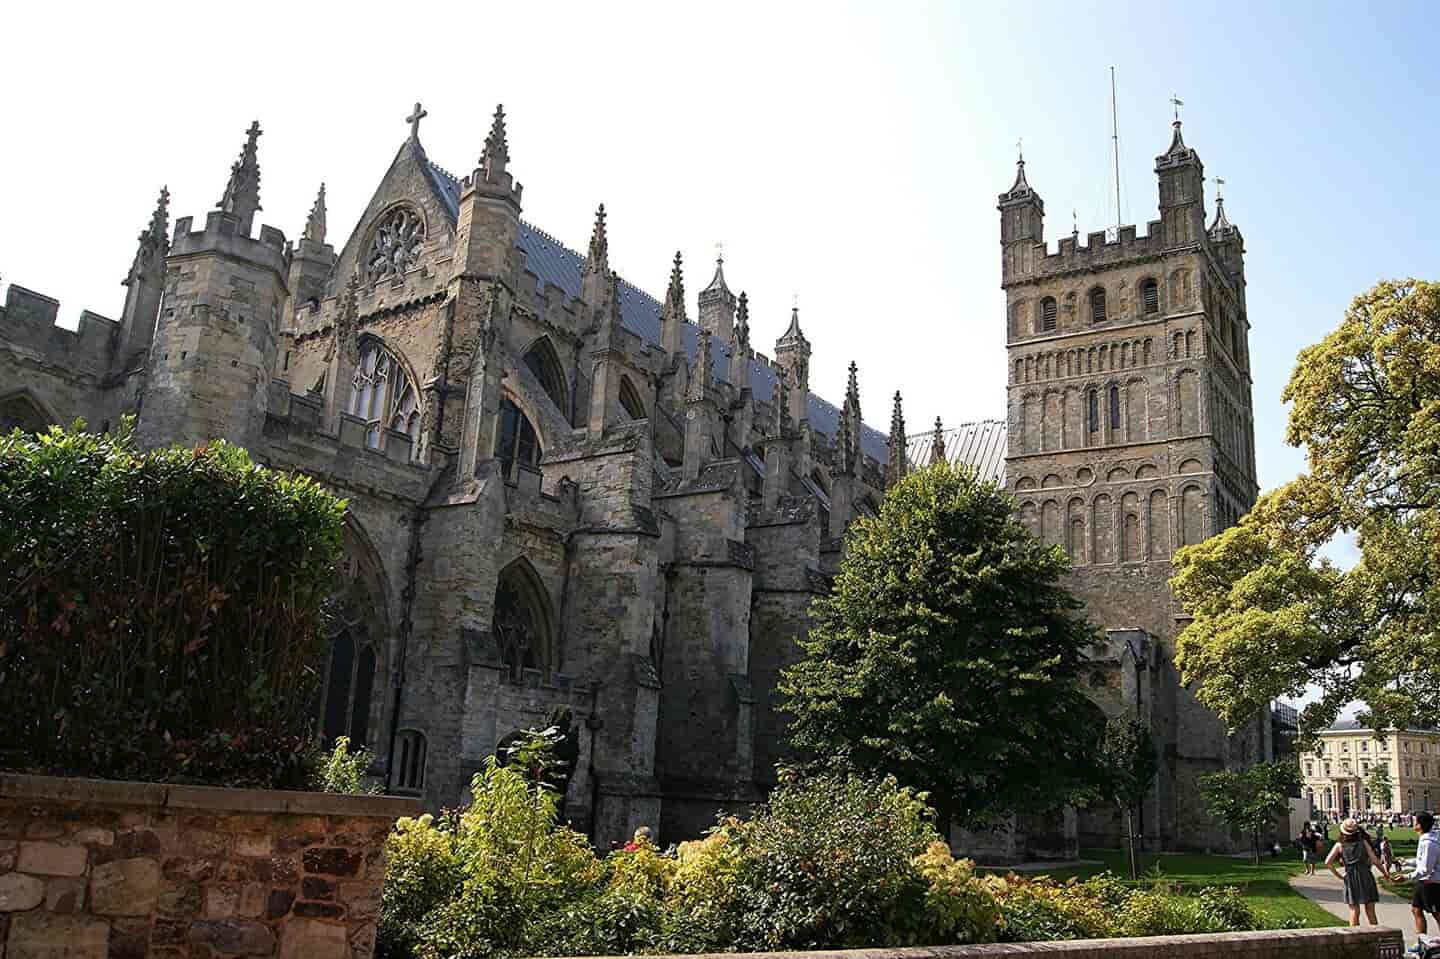 Student Accommodation in Exeter - Exeter Cathedral on a clear day